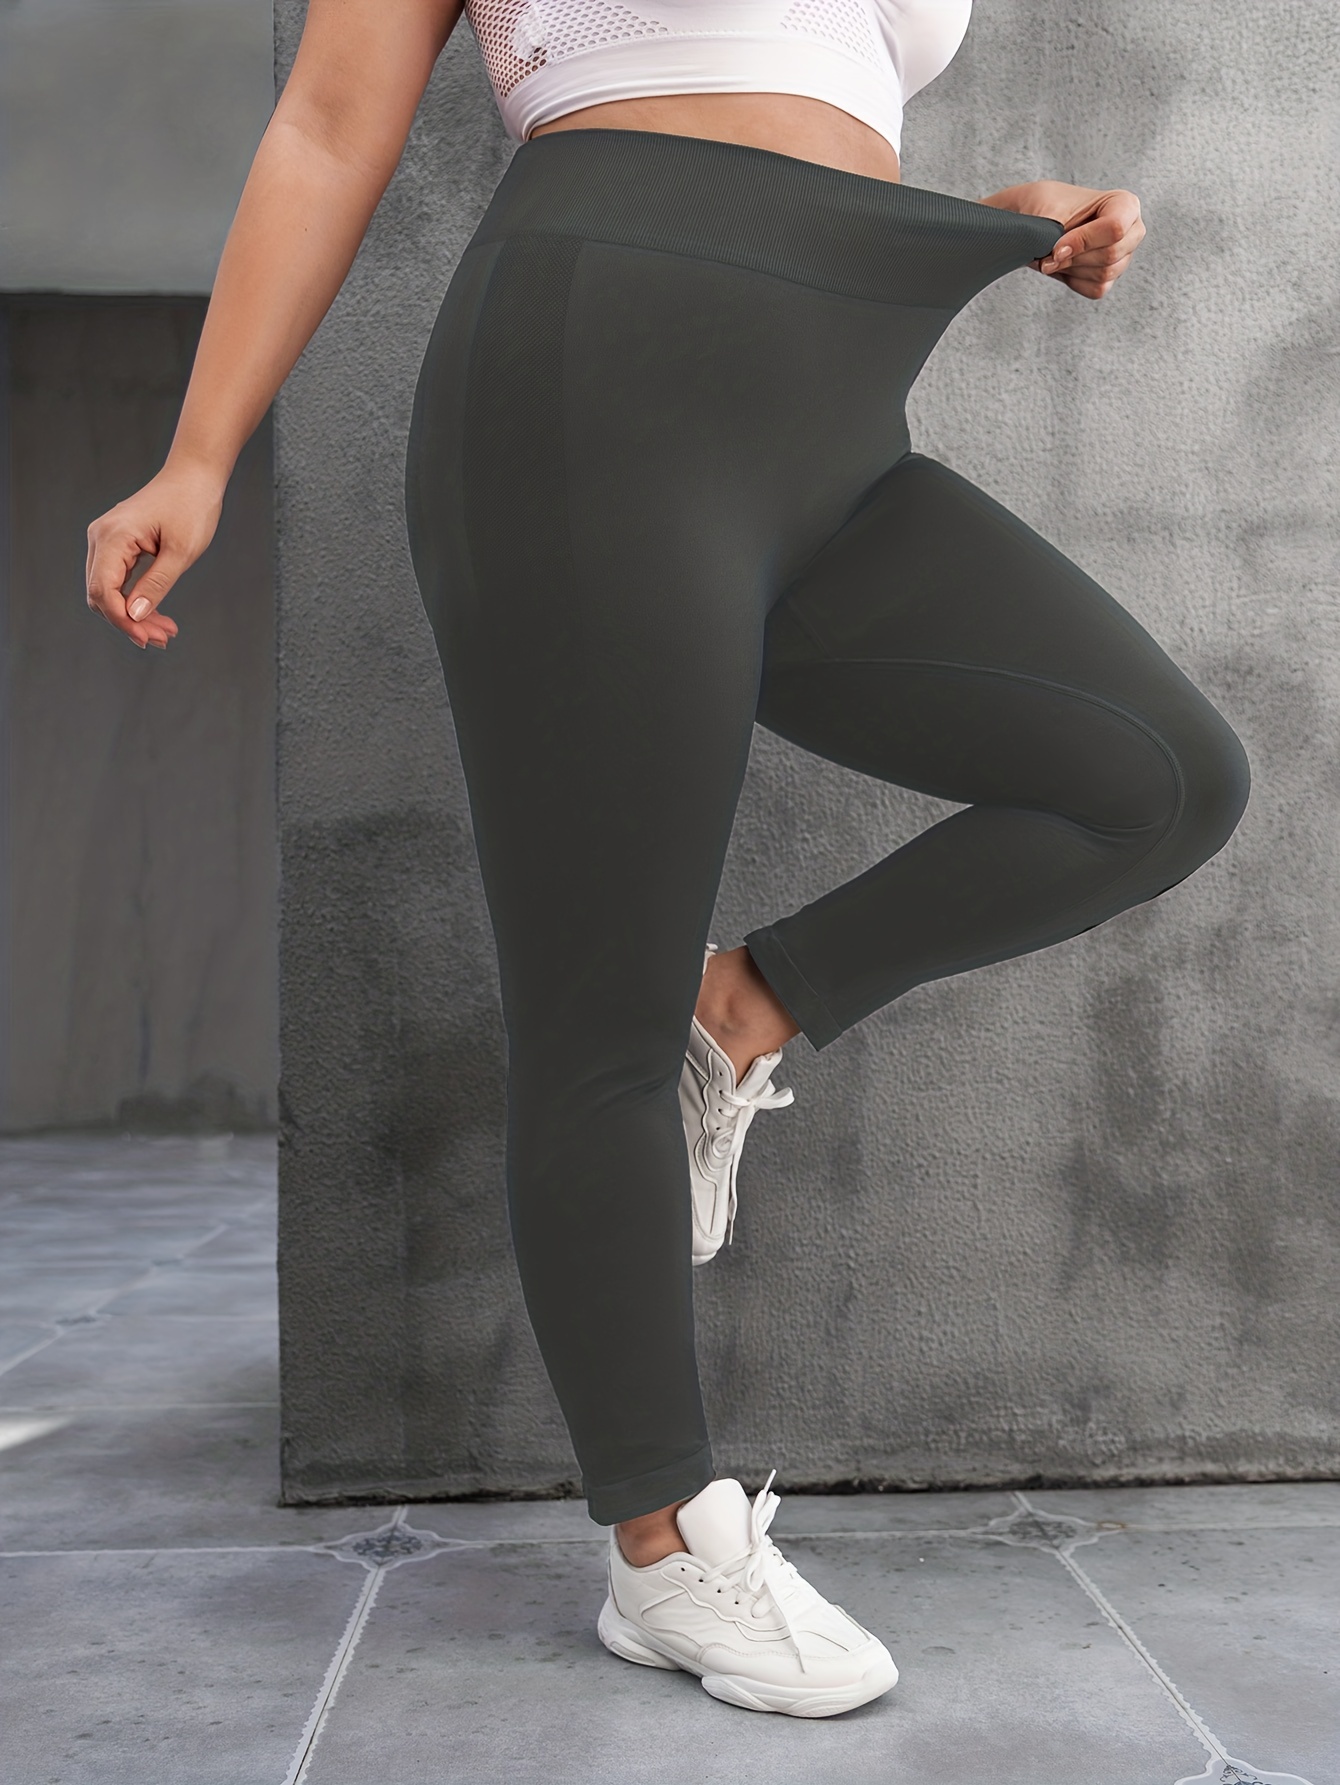 Workout Leggings For Women Plus Size Seamless Tight High Waisted Elastic  Quick Dry Breathable Exercise Pants Womens Leggings Plus Size 